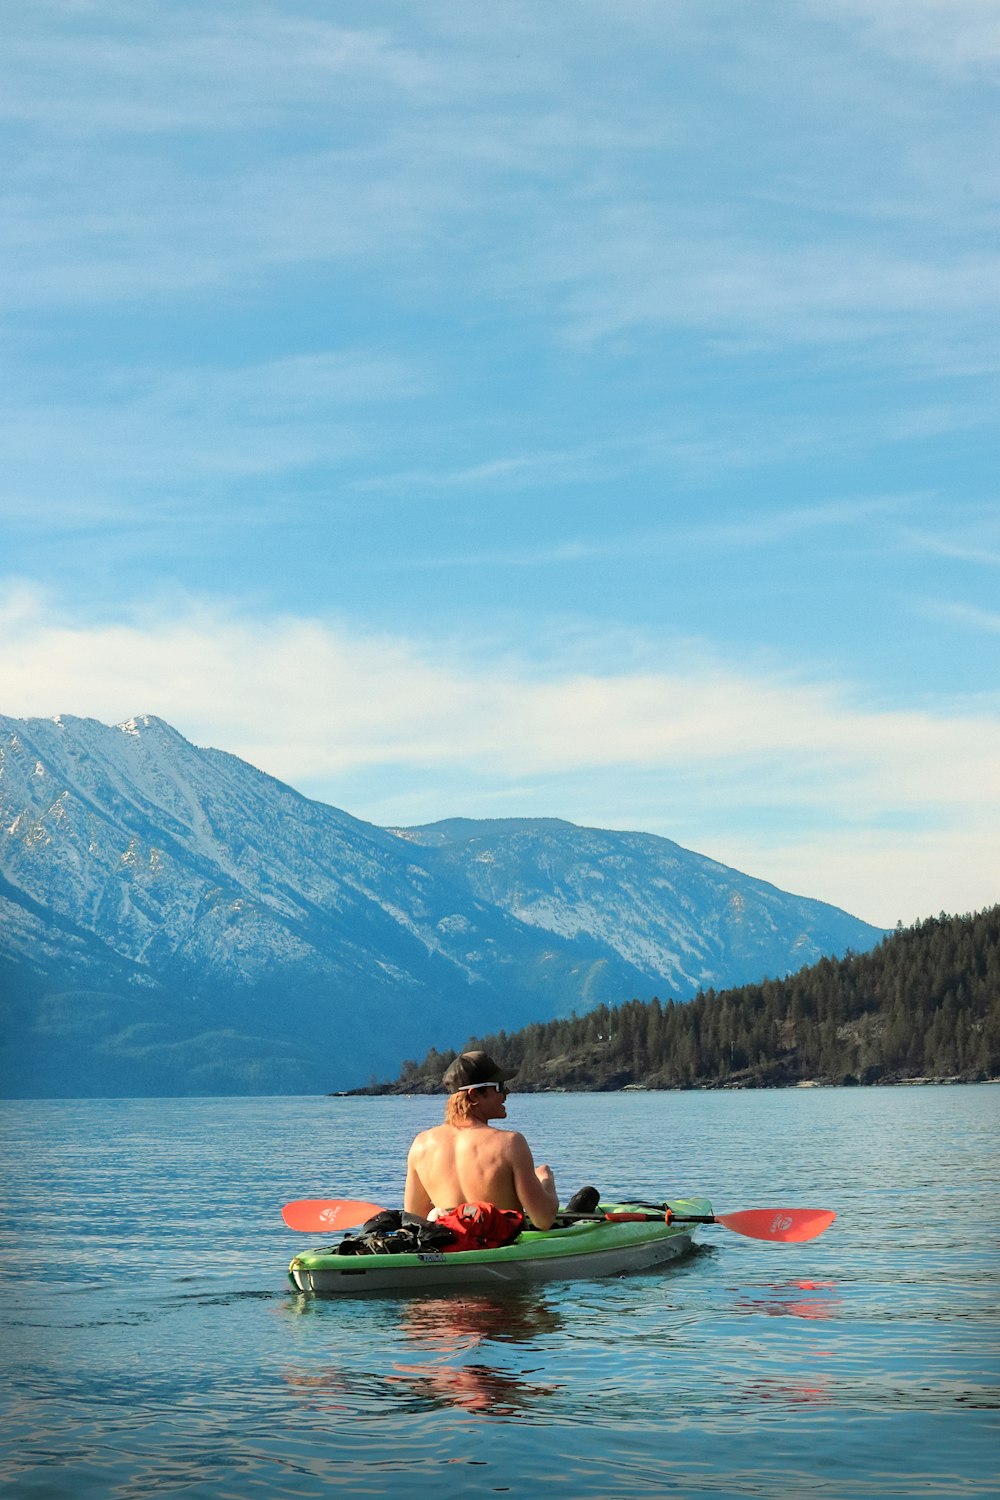 a man sitting in a kayak on a lake with mountains in the background